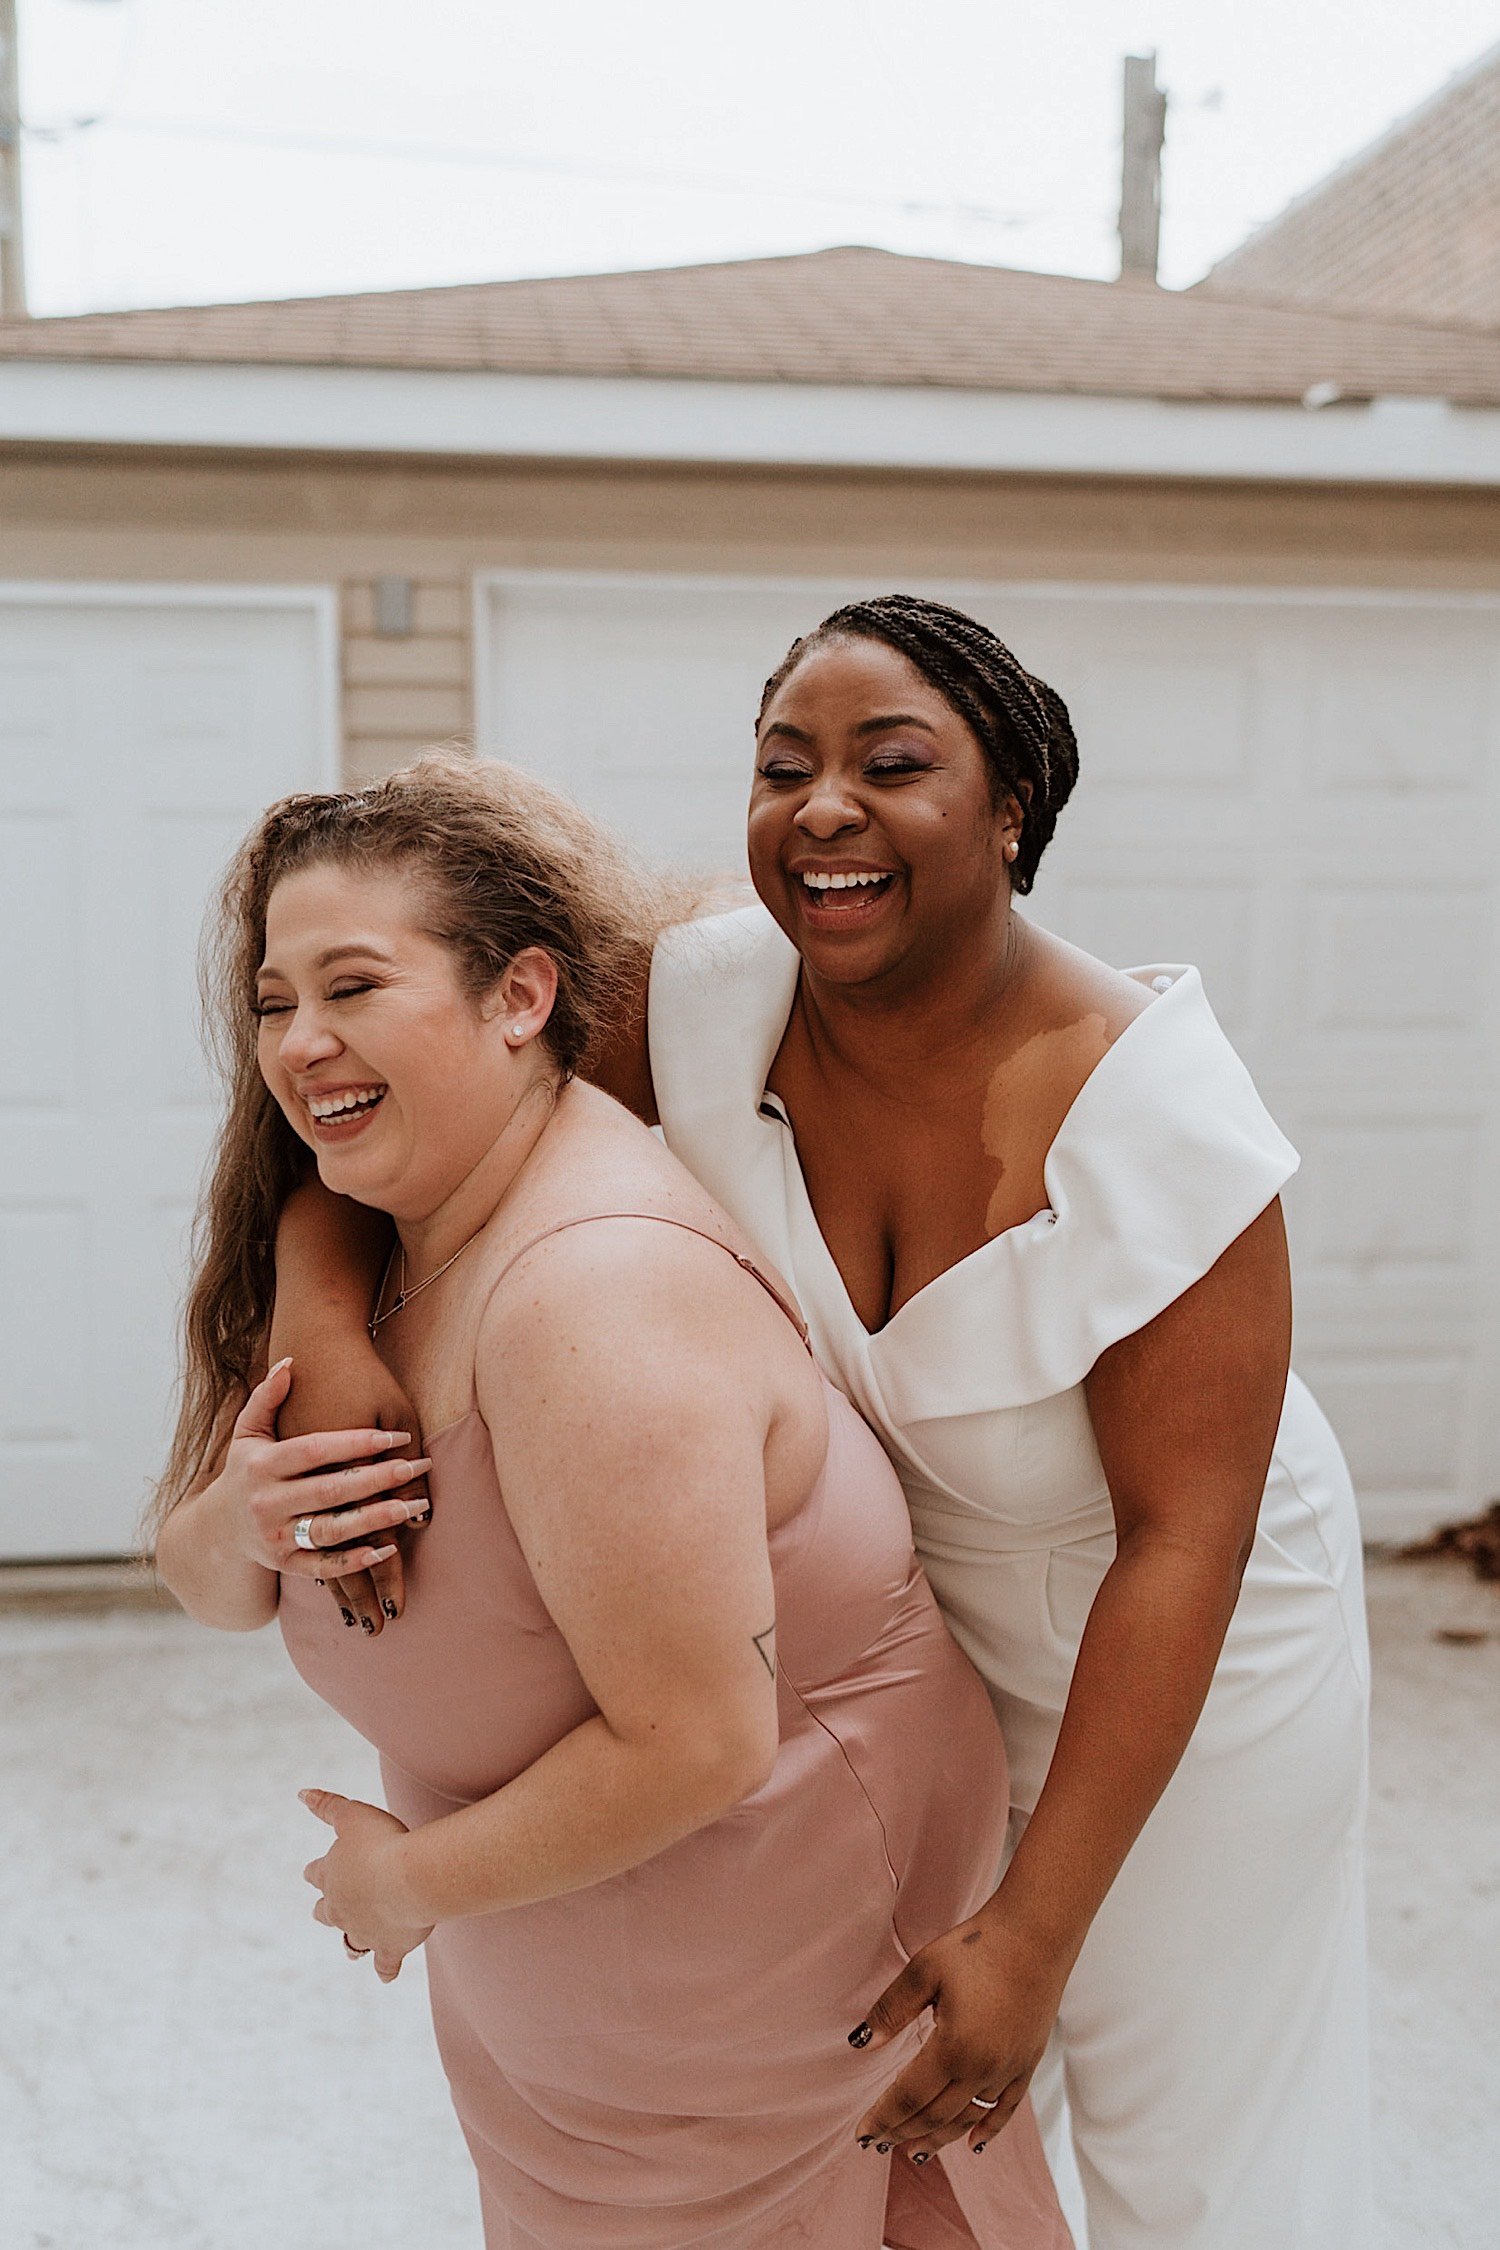 Brides laugh and hold each other in front of garage